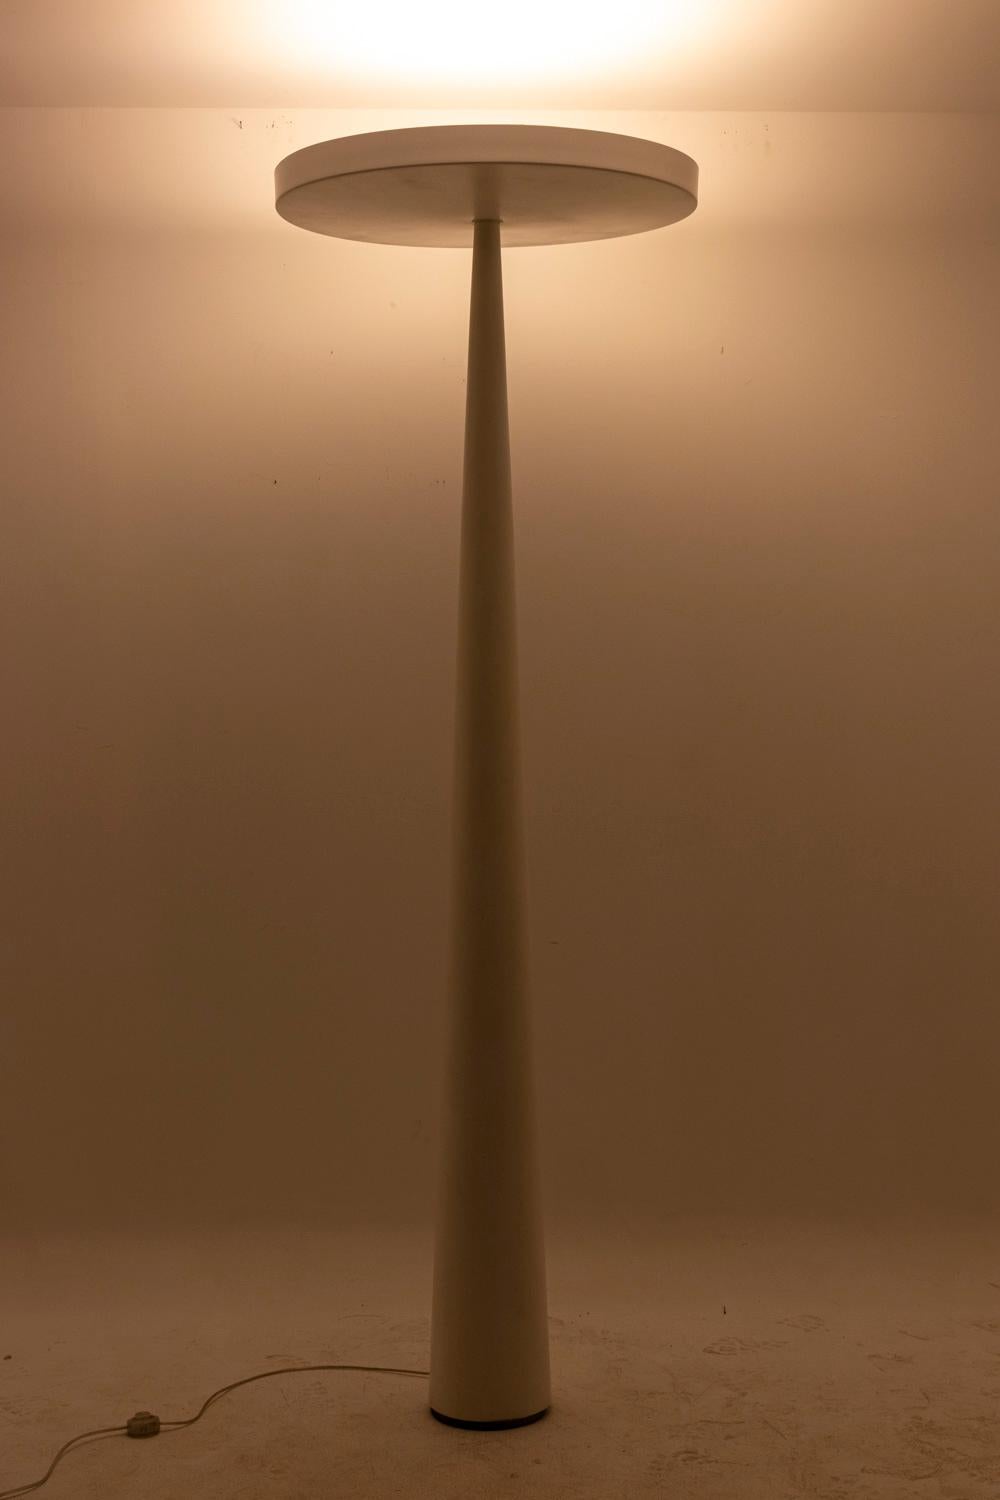 Luc Ramael, signed.
Prandina, edited by. 
Floor lamp in polypropylene and aluminum painted white. Conical base and round halo. Diffused lighting with switch on the power cord.

Belgian contemporary work realized in 2004.

Dimensions : H 202 x